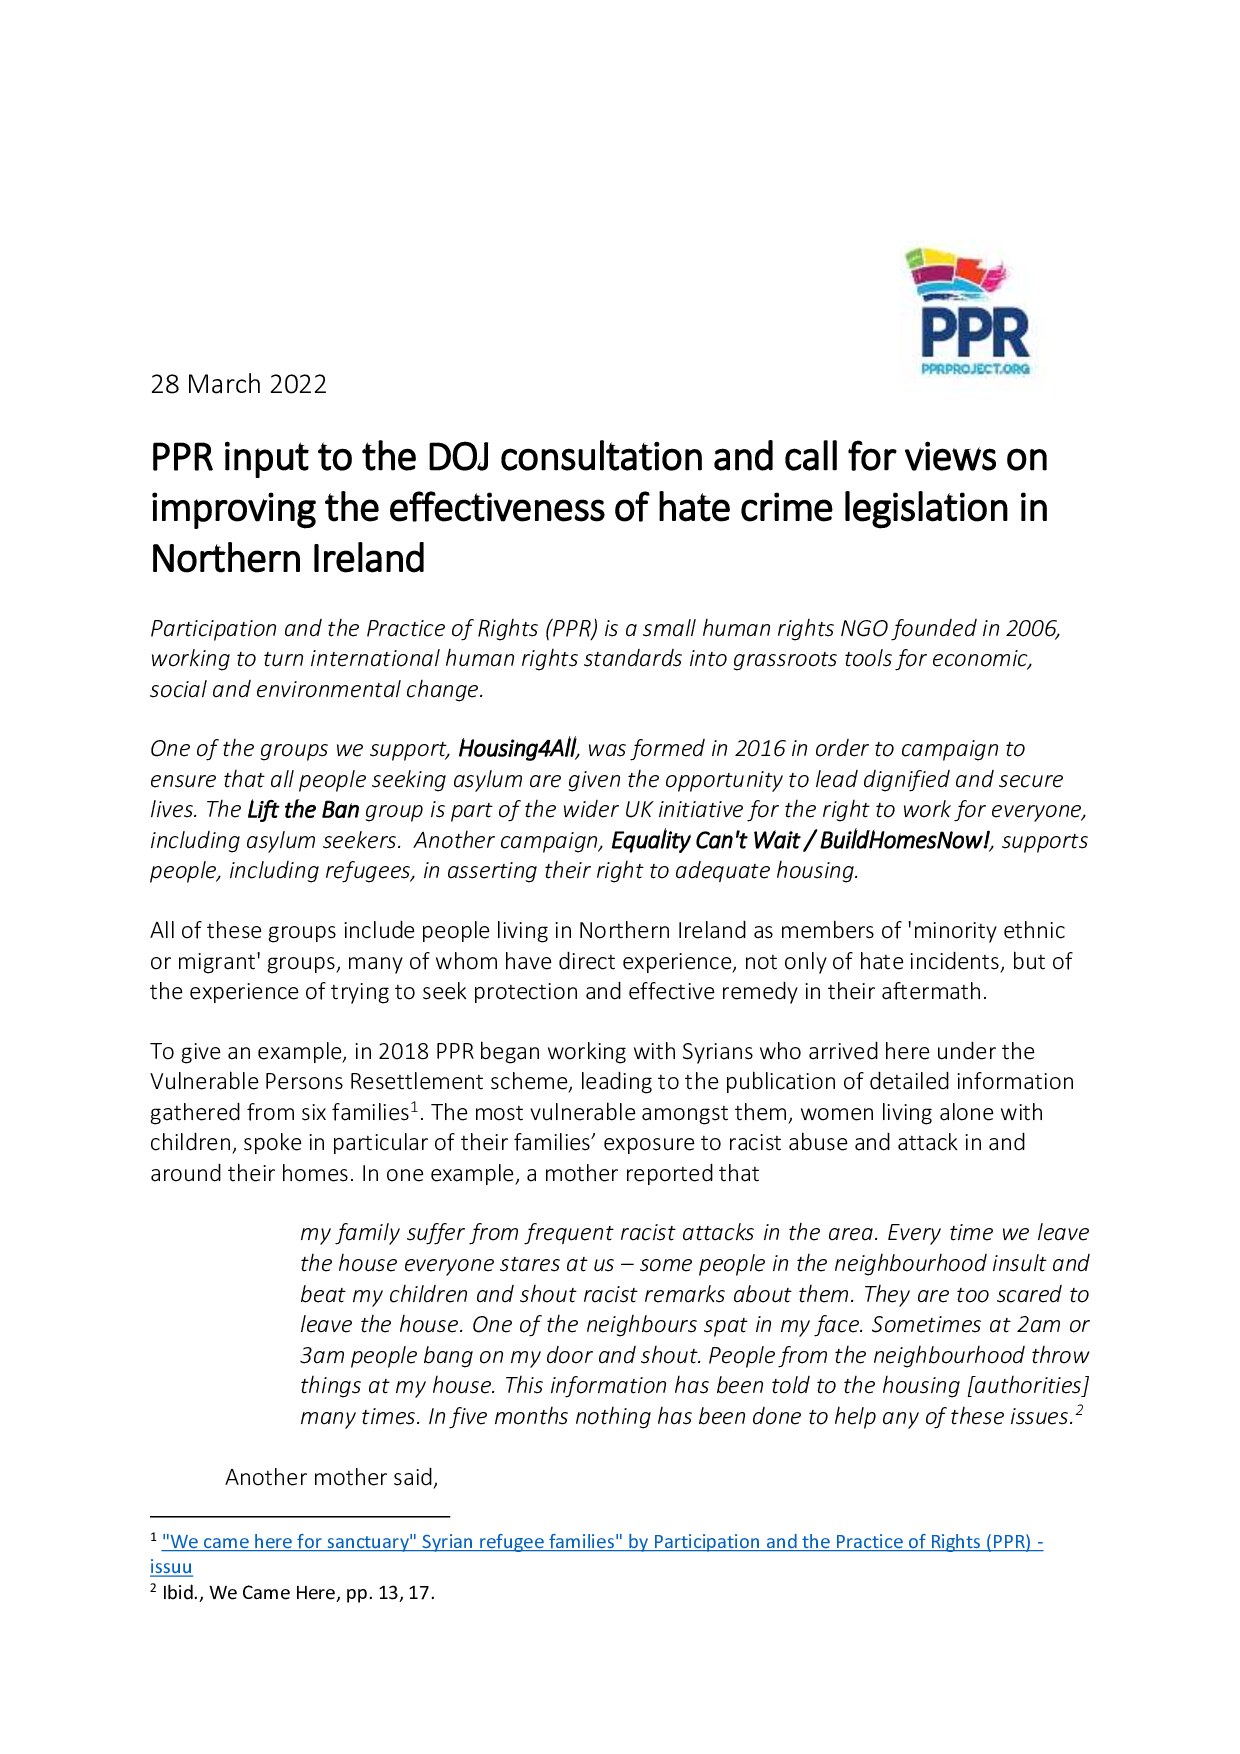 PPR input to the Department of Justice consultation on improving the effectiveness of NI Hate Crime legislation